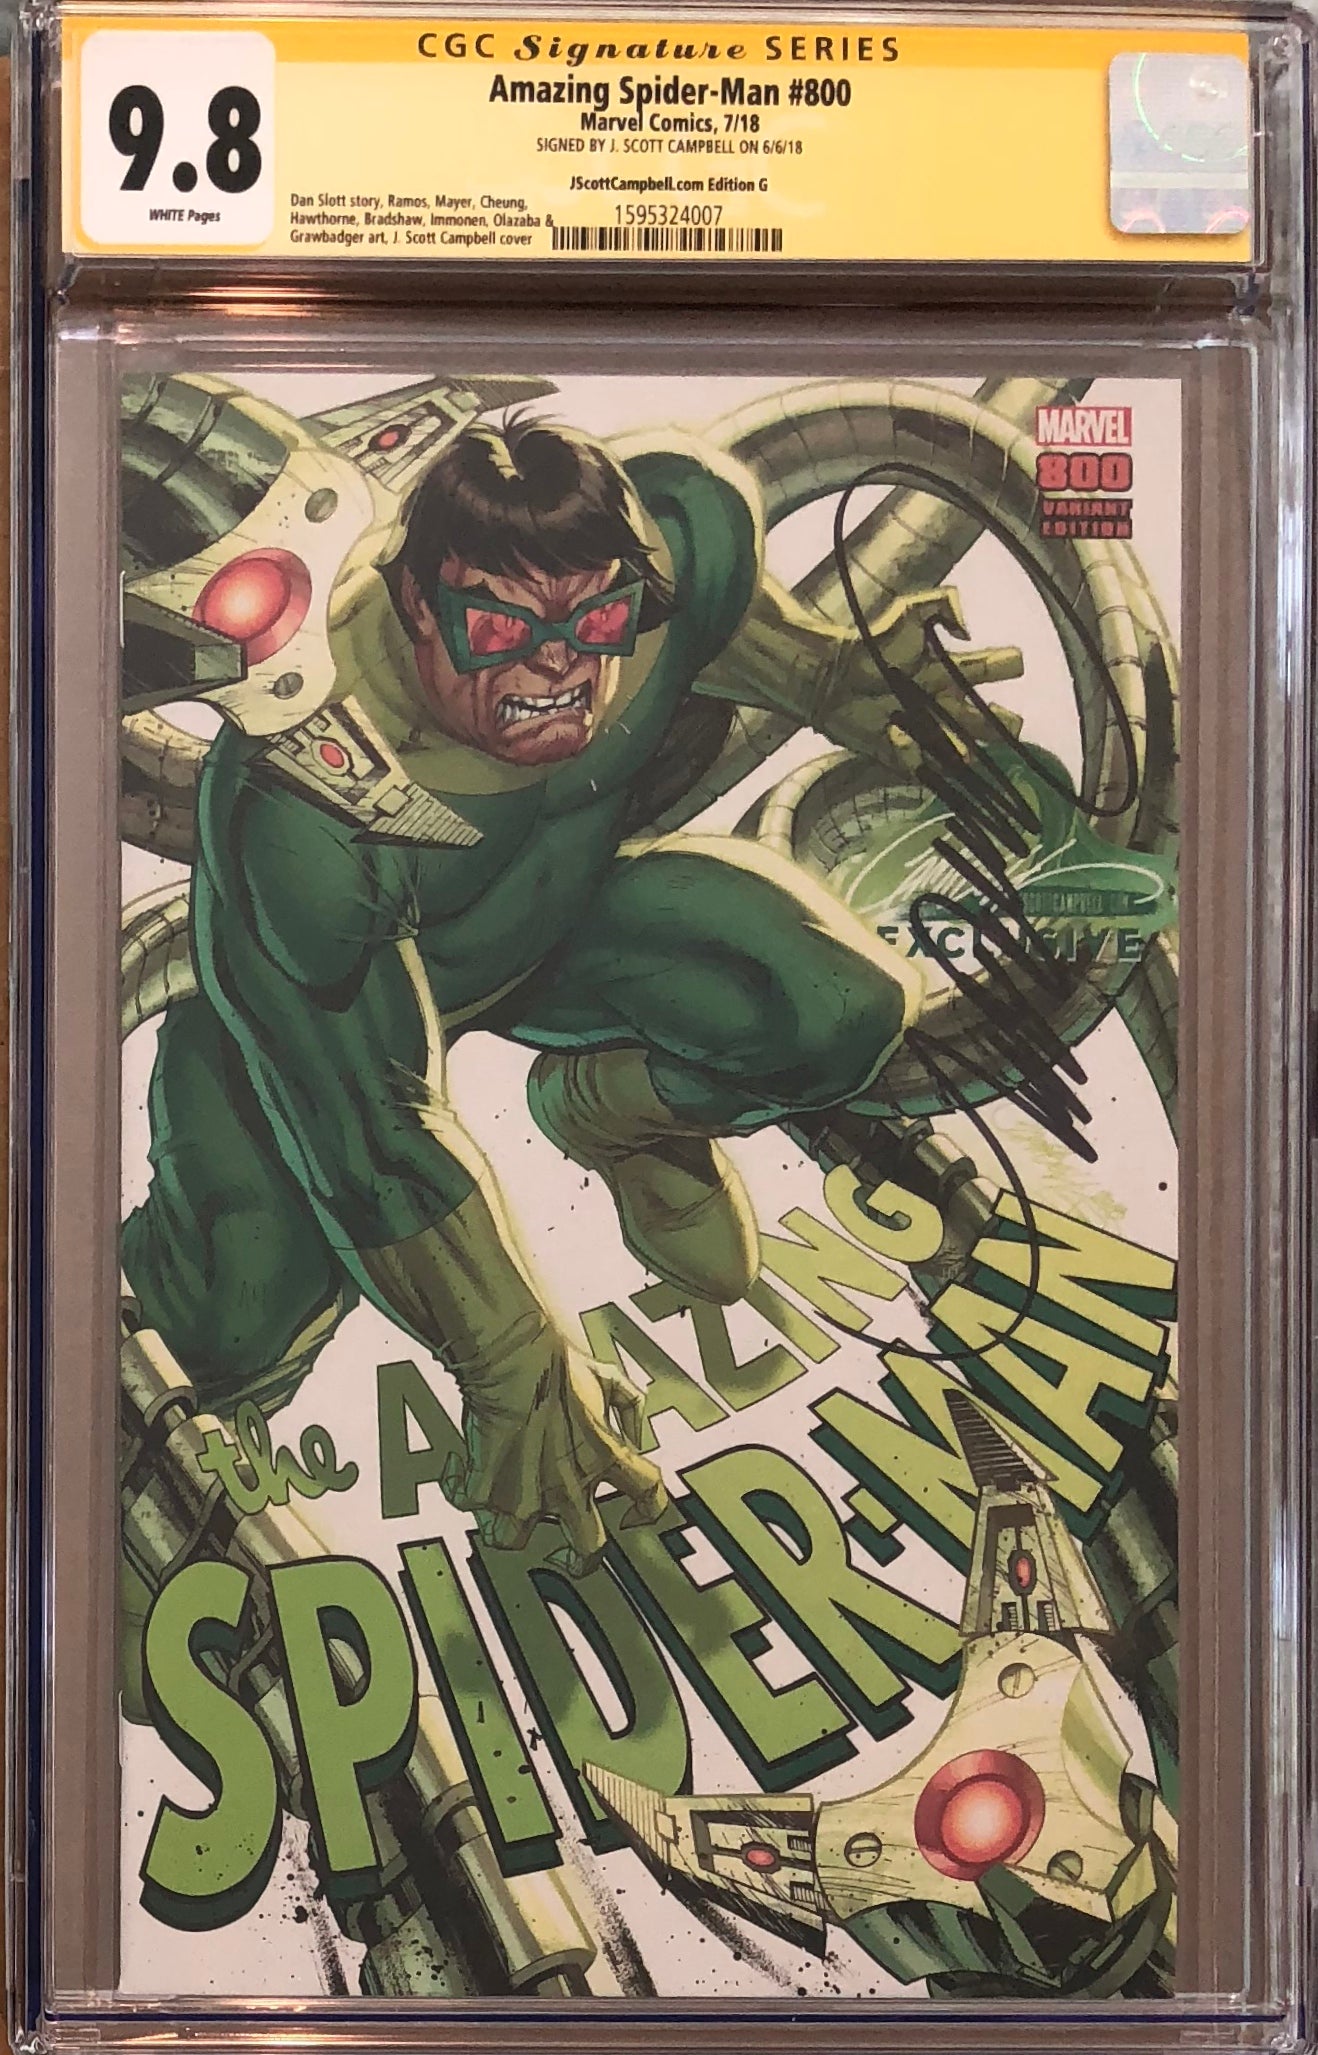 Amazing Spider-Man #800 J. Scott Campbell Edition G "Dr. Octopus" Exclusive CGC 9.8 SS